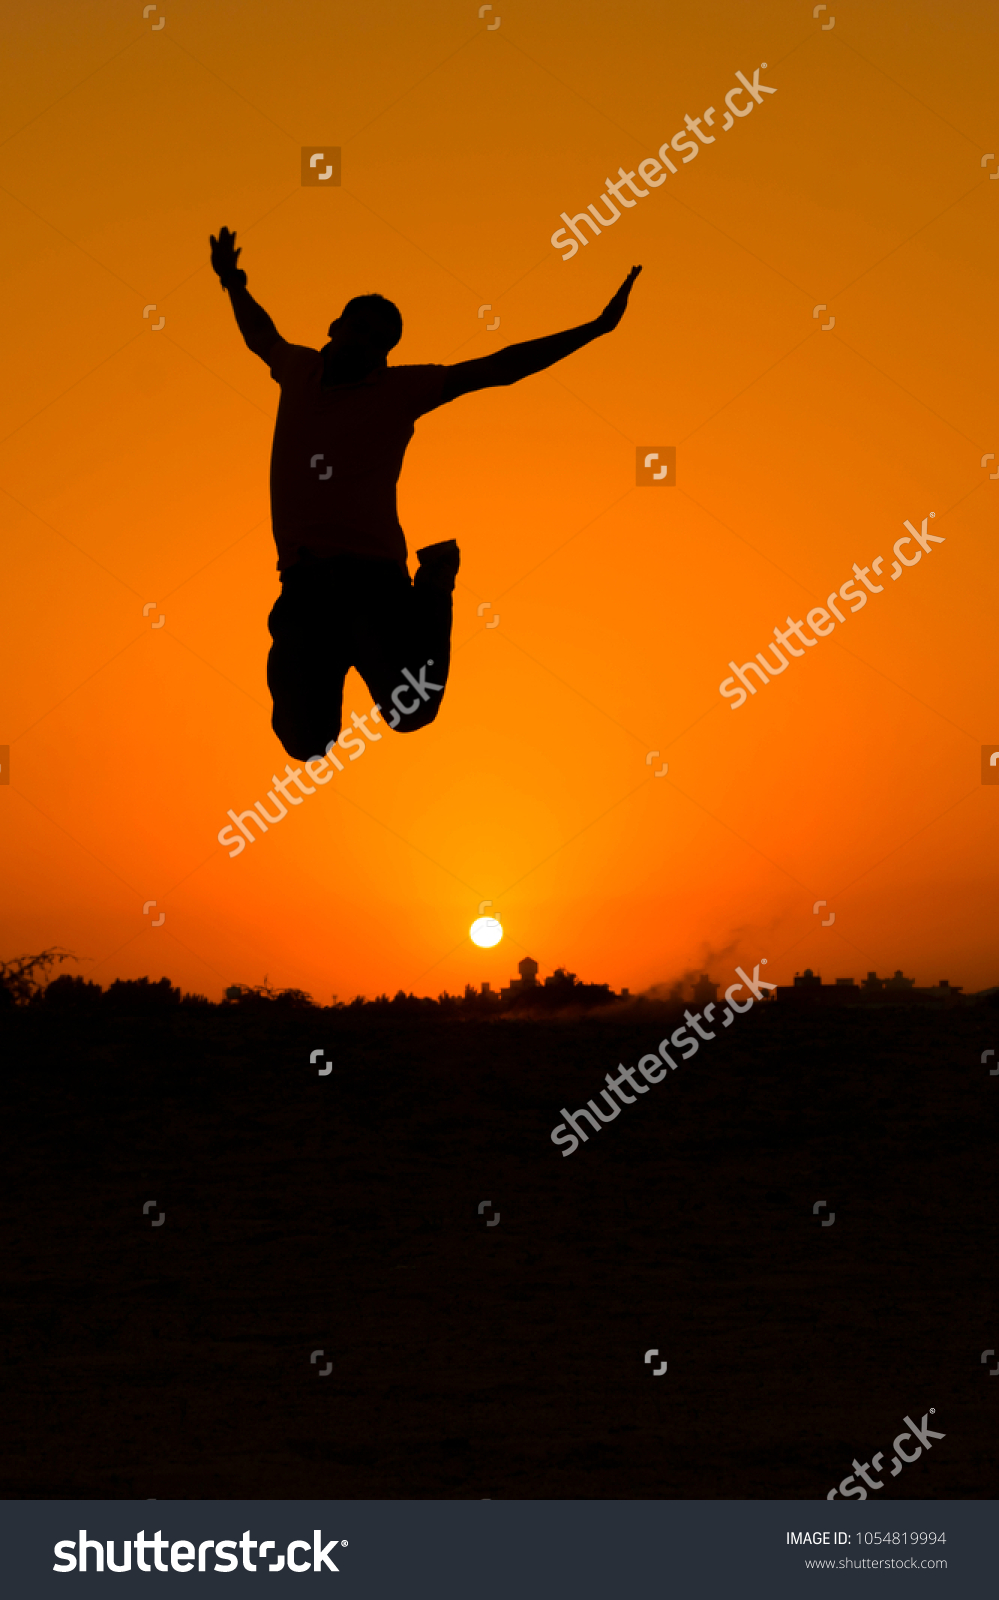 The silhouette of people jumping with sunset background,concept of happiness, joy, joyful life #1054819994